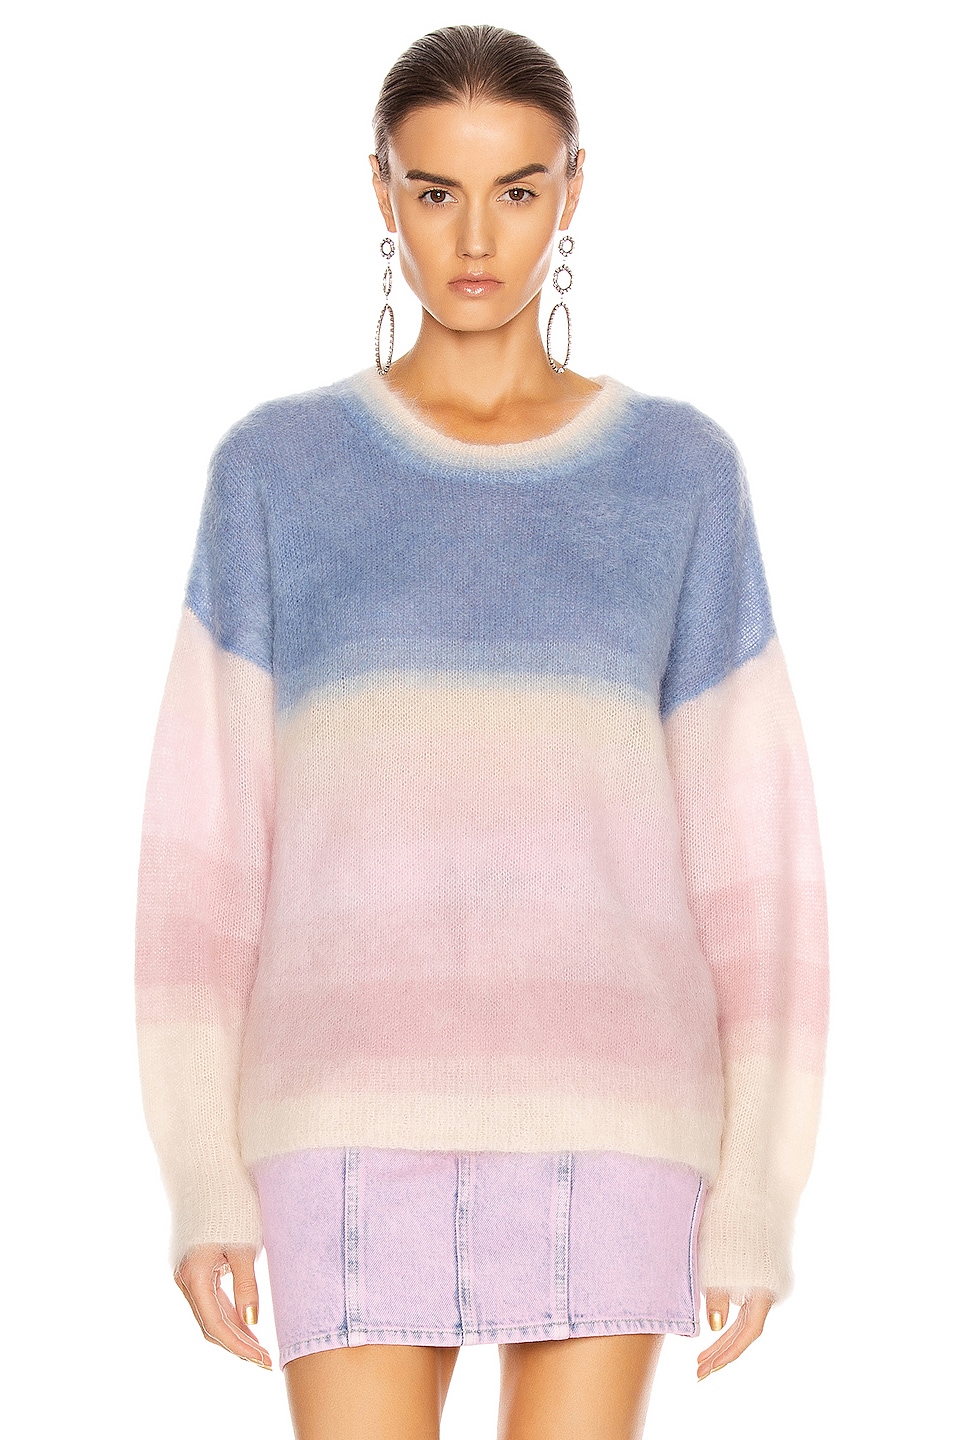 Isabel Marant Etoile Drussell Sweater in Blue | FWRD